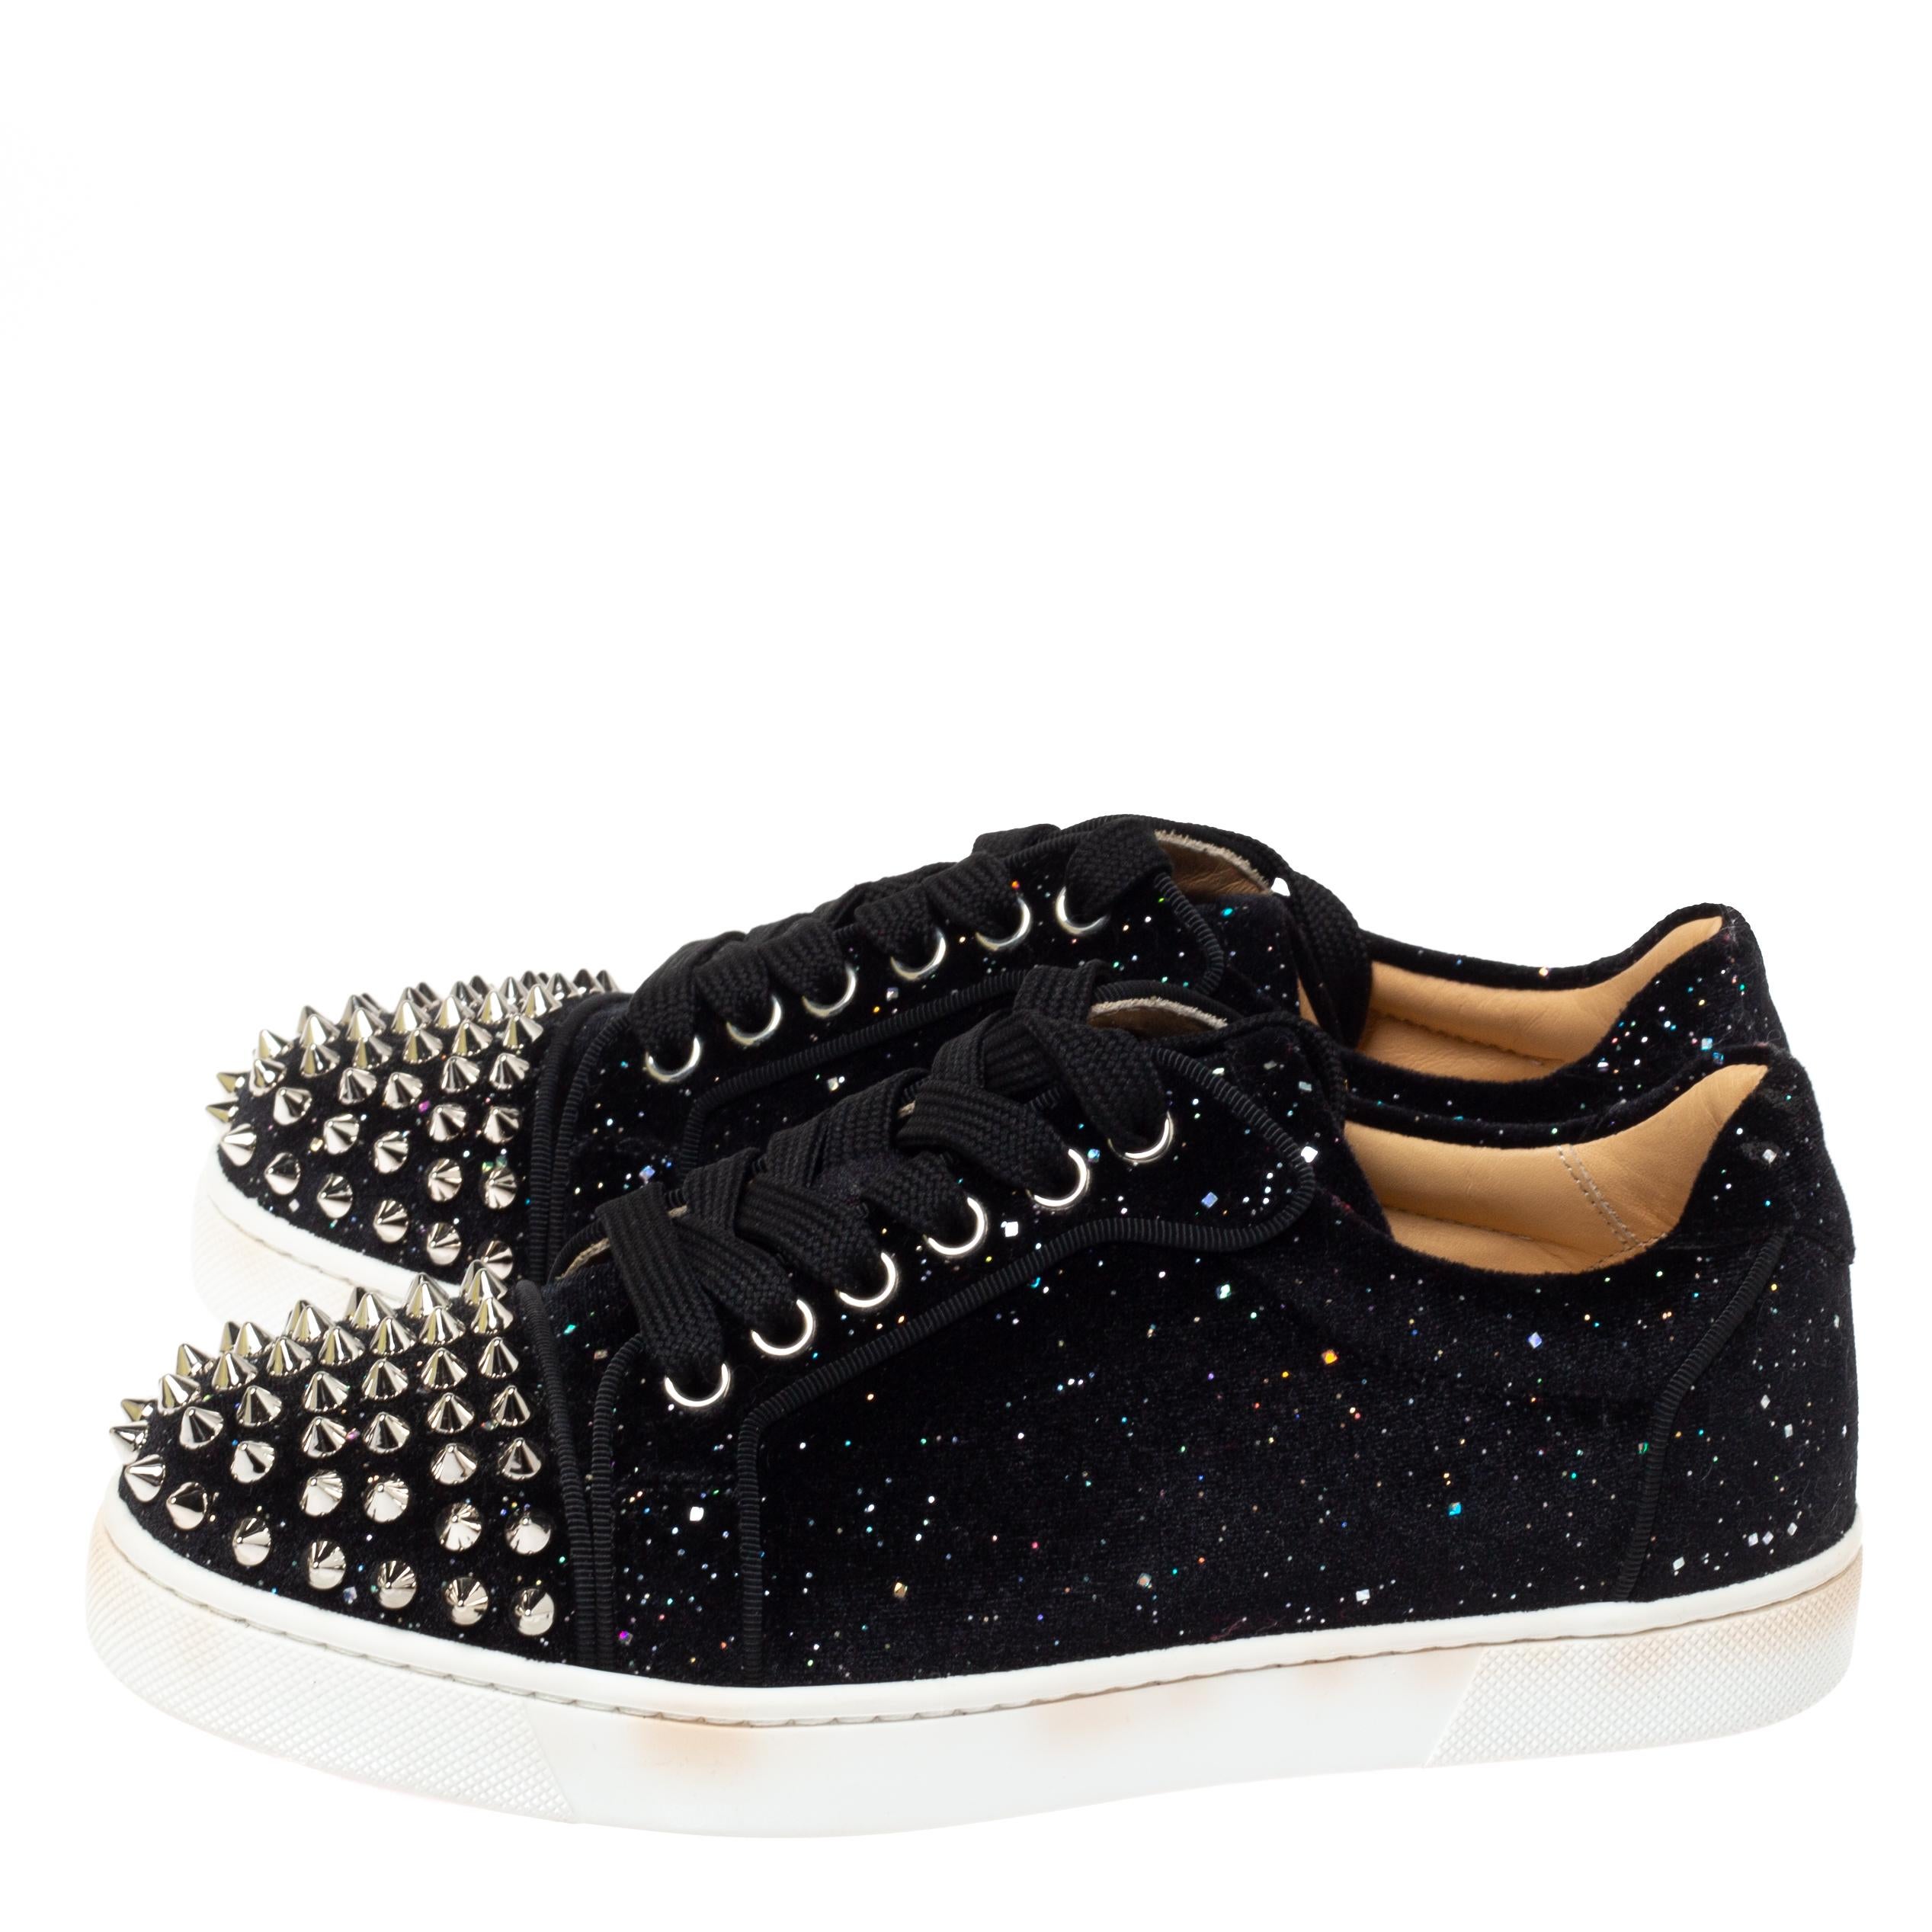 Christian Louboutin Black Glitter Suede Louis Junior Spikes Low Top Size 35 2